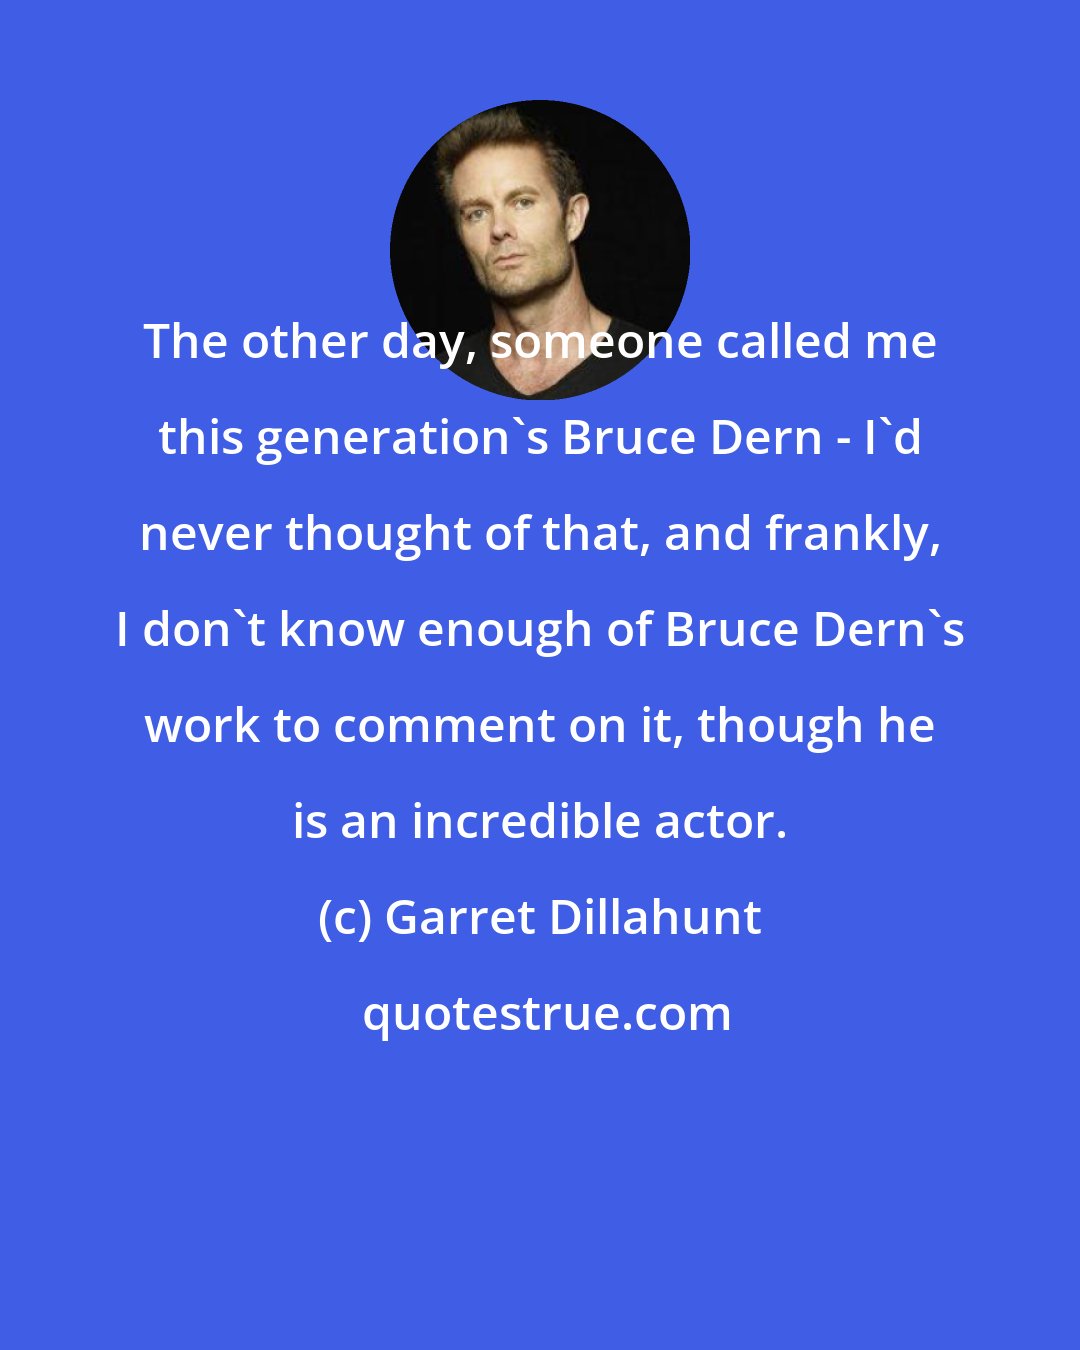 Garret Dillahunt: The other day, someone called me this generation's Bruce Dern - I'd never thought of that, and frankly, I don't know enough of Bruce Dern's work to comment on it, though he is an incredible actor.